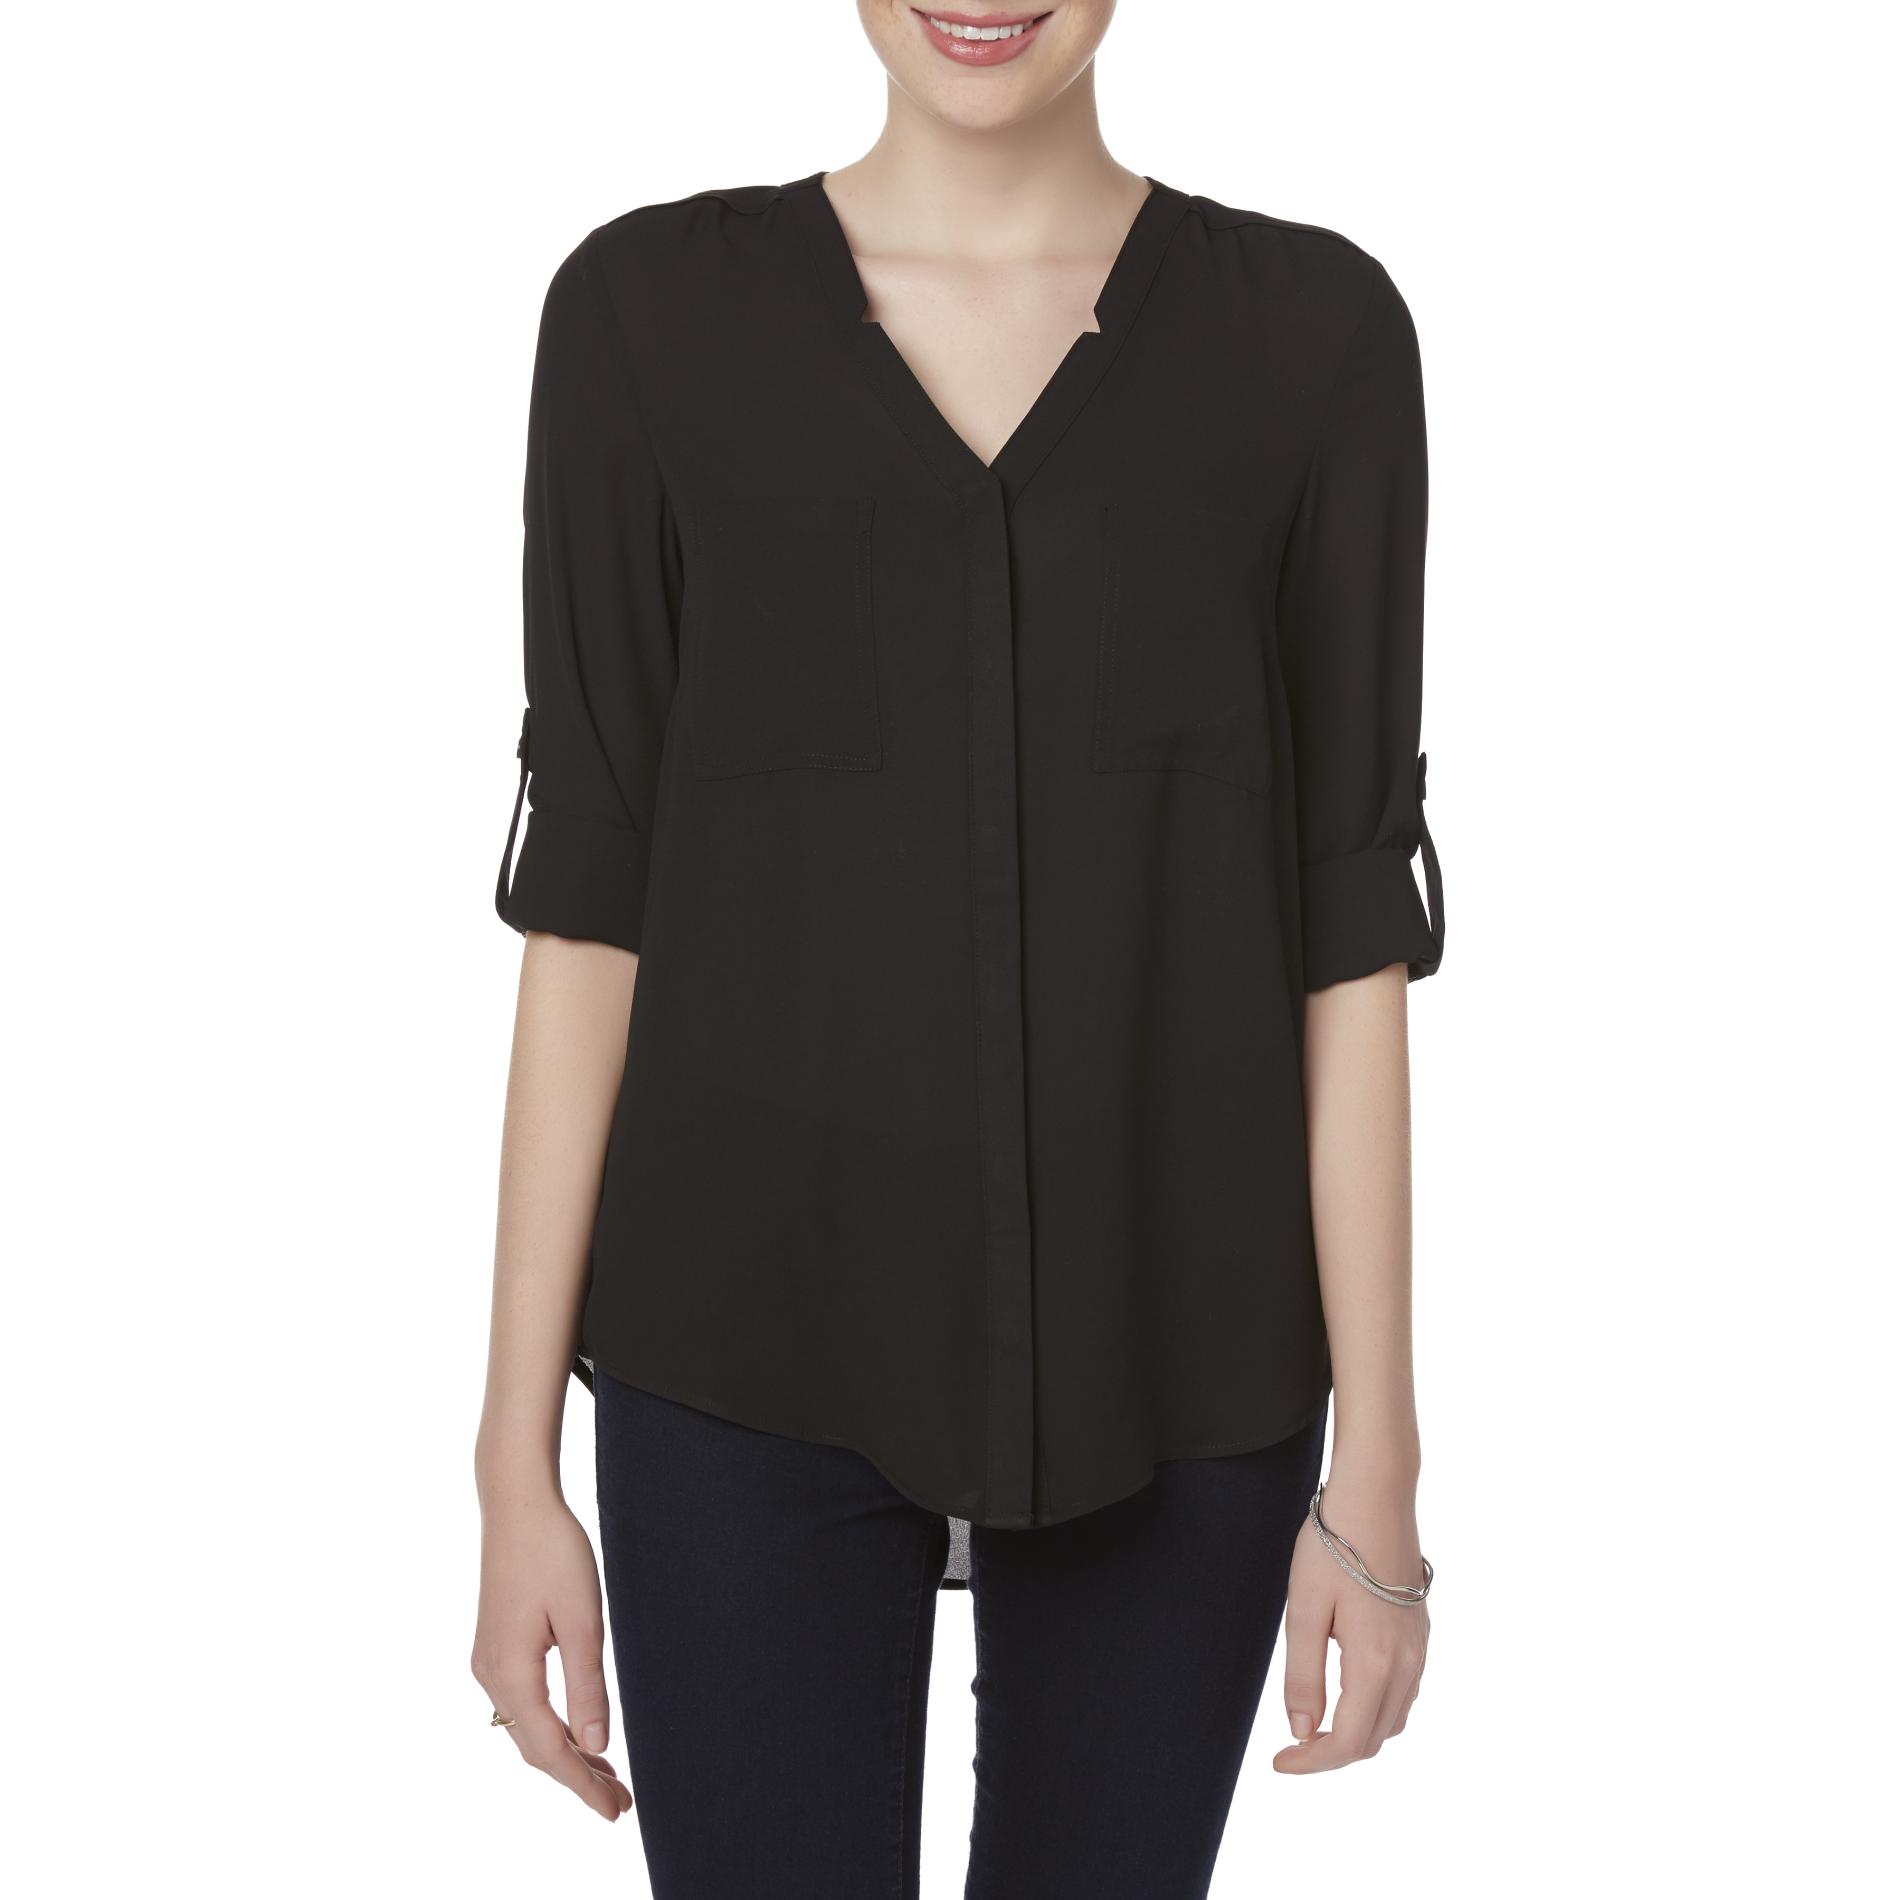 Simply Styled Petites' Utility Blouse